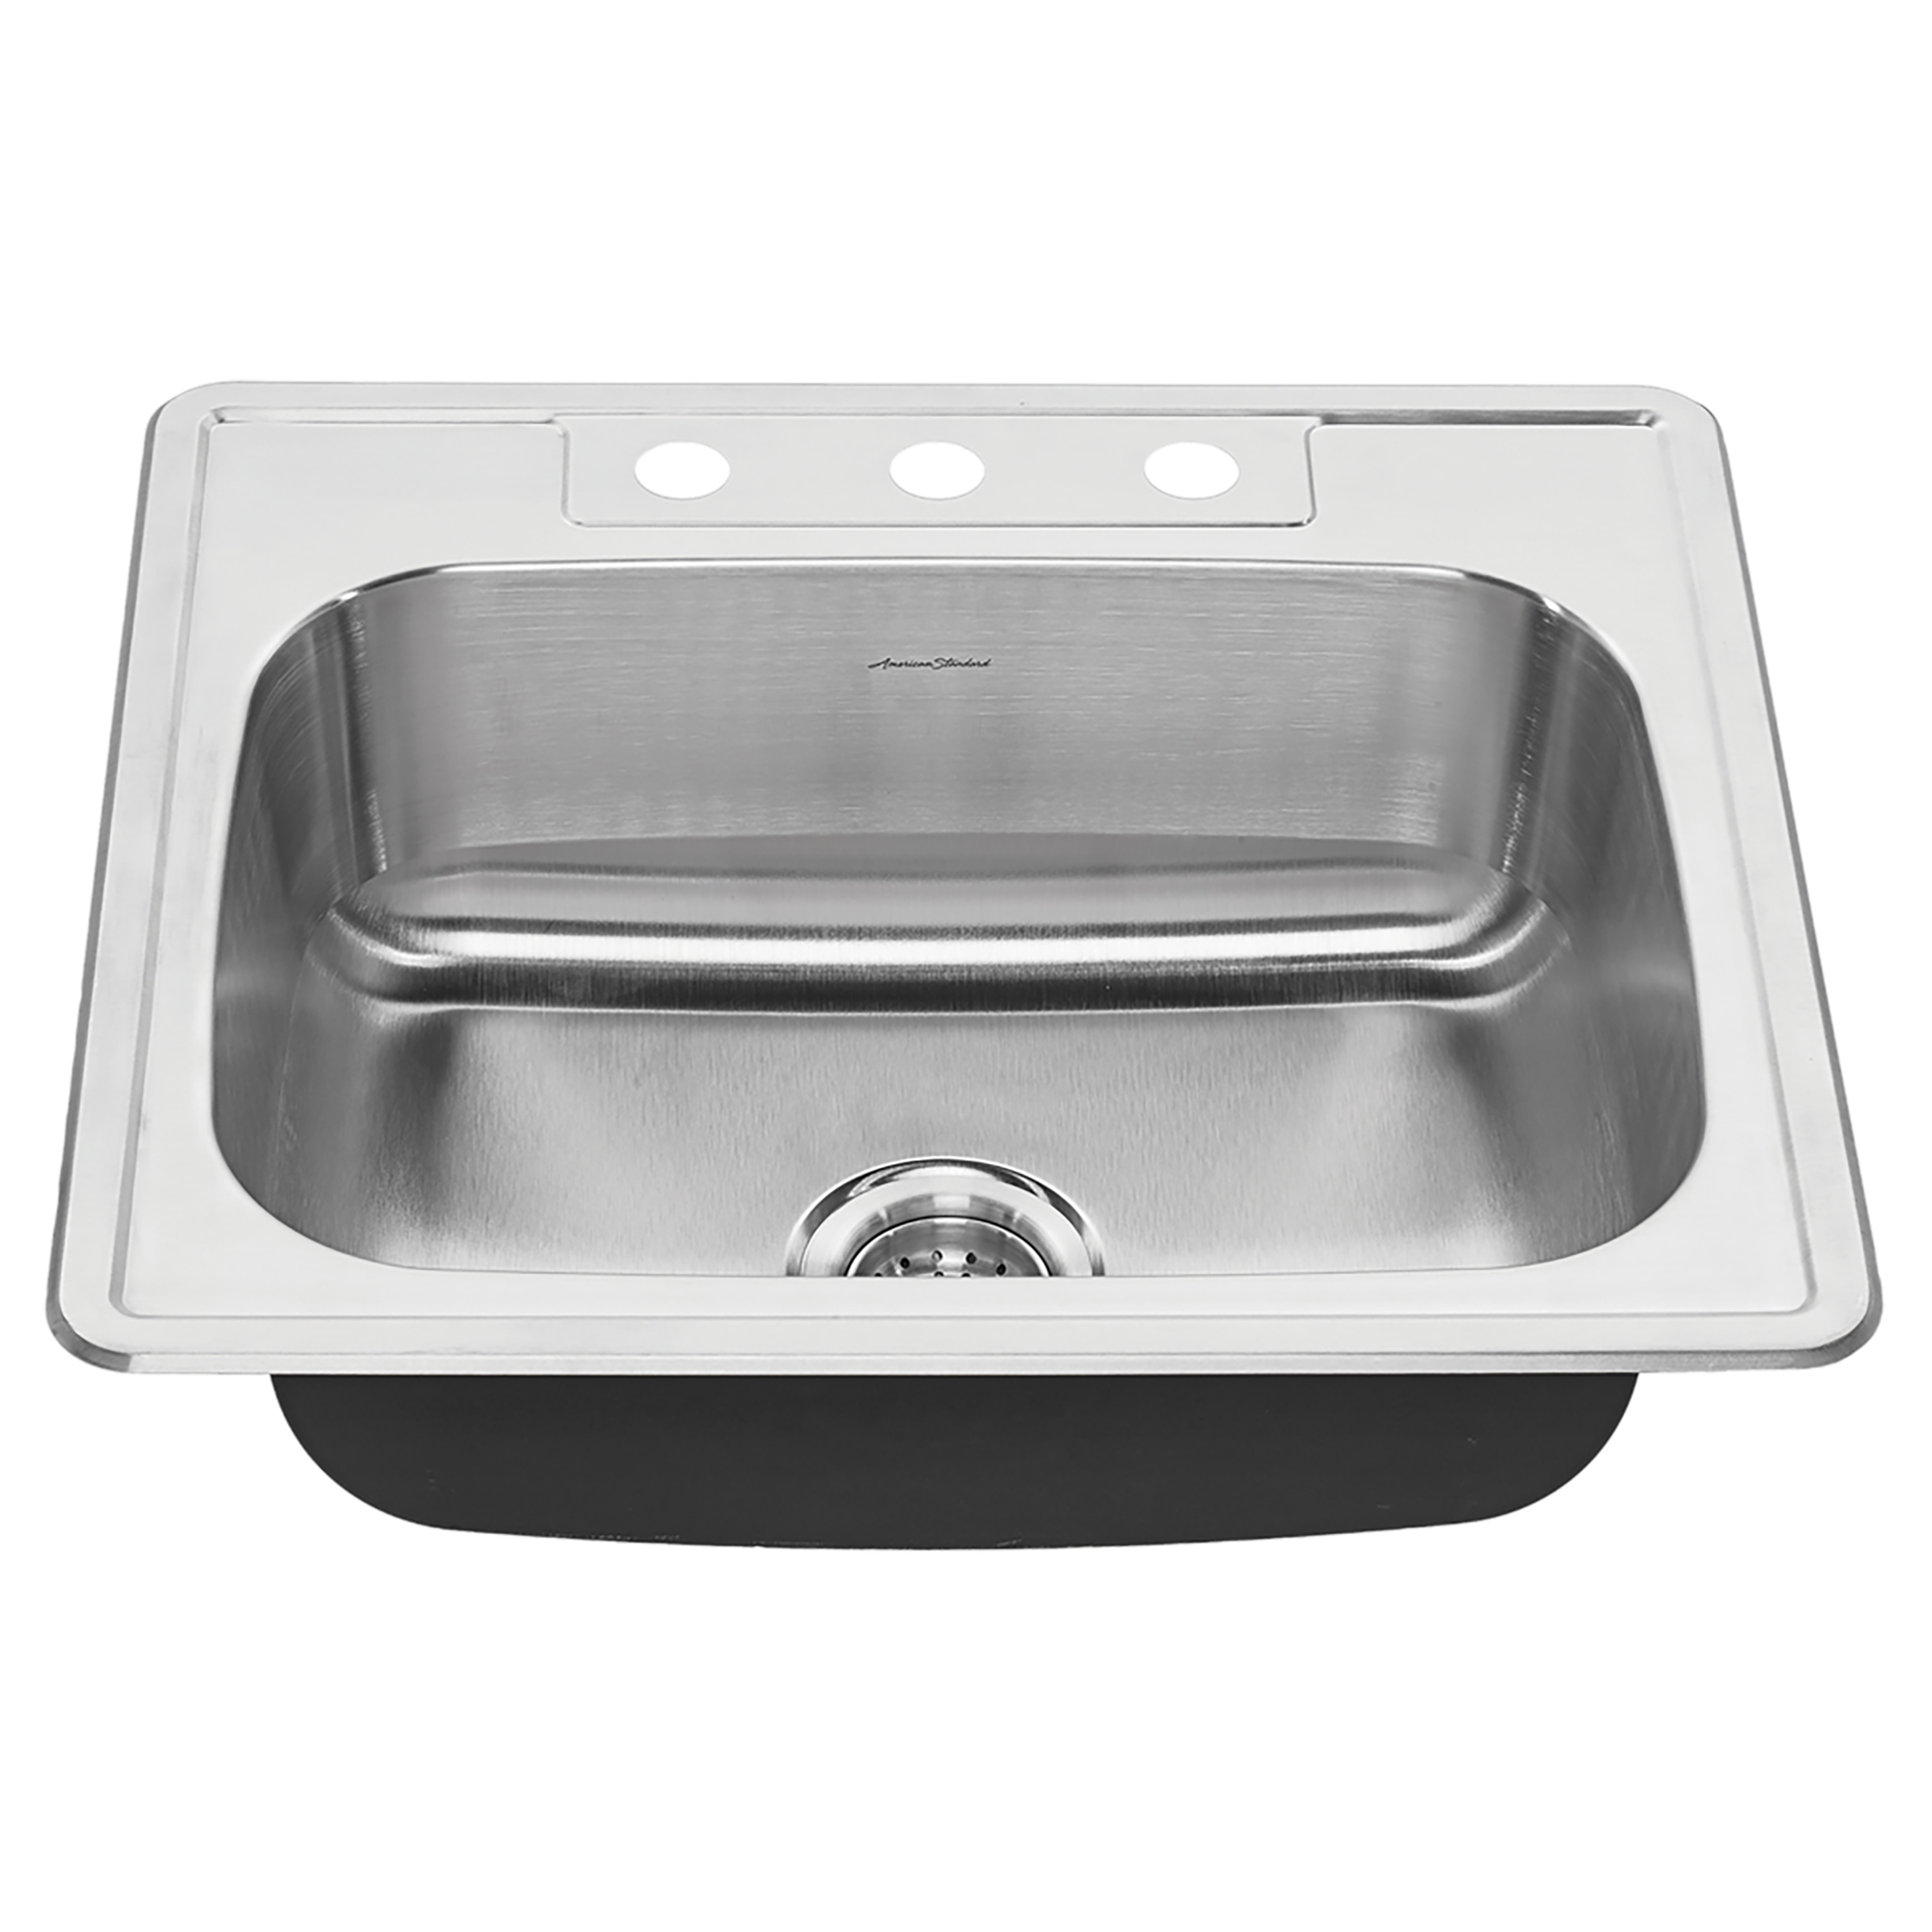 Colony™ 25 x 22-Inch Stainless Steel 3-Hole Top Mount Single-Bowl ADA Kitchen Sink